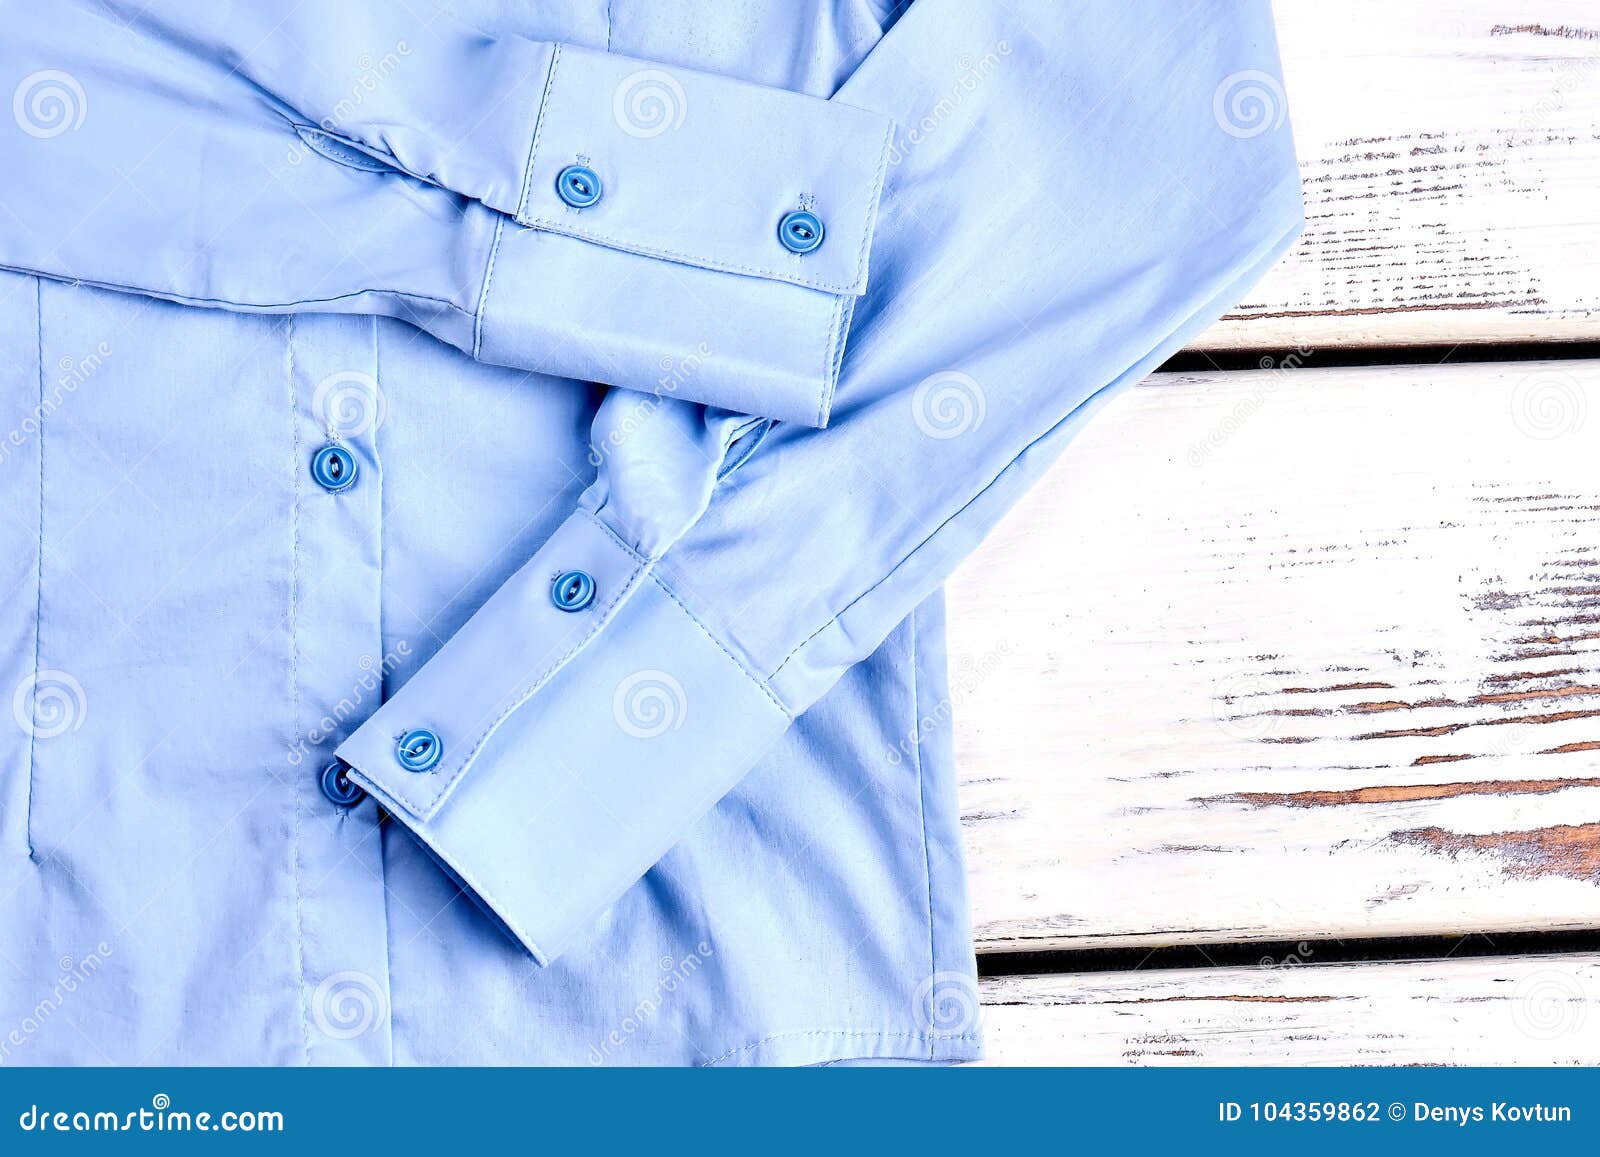 Detail of Light Blue Cotton Shirt. Stock Photo - Image of clothing ...